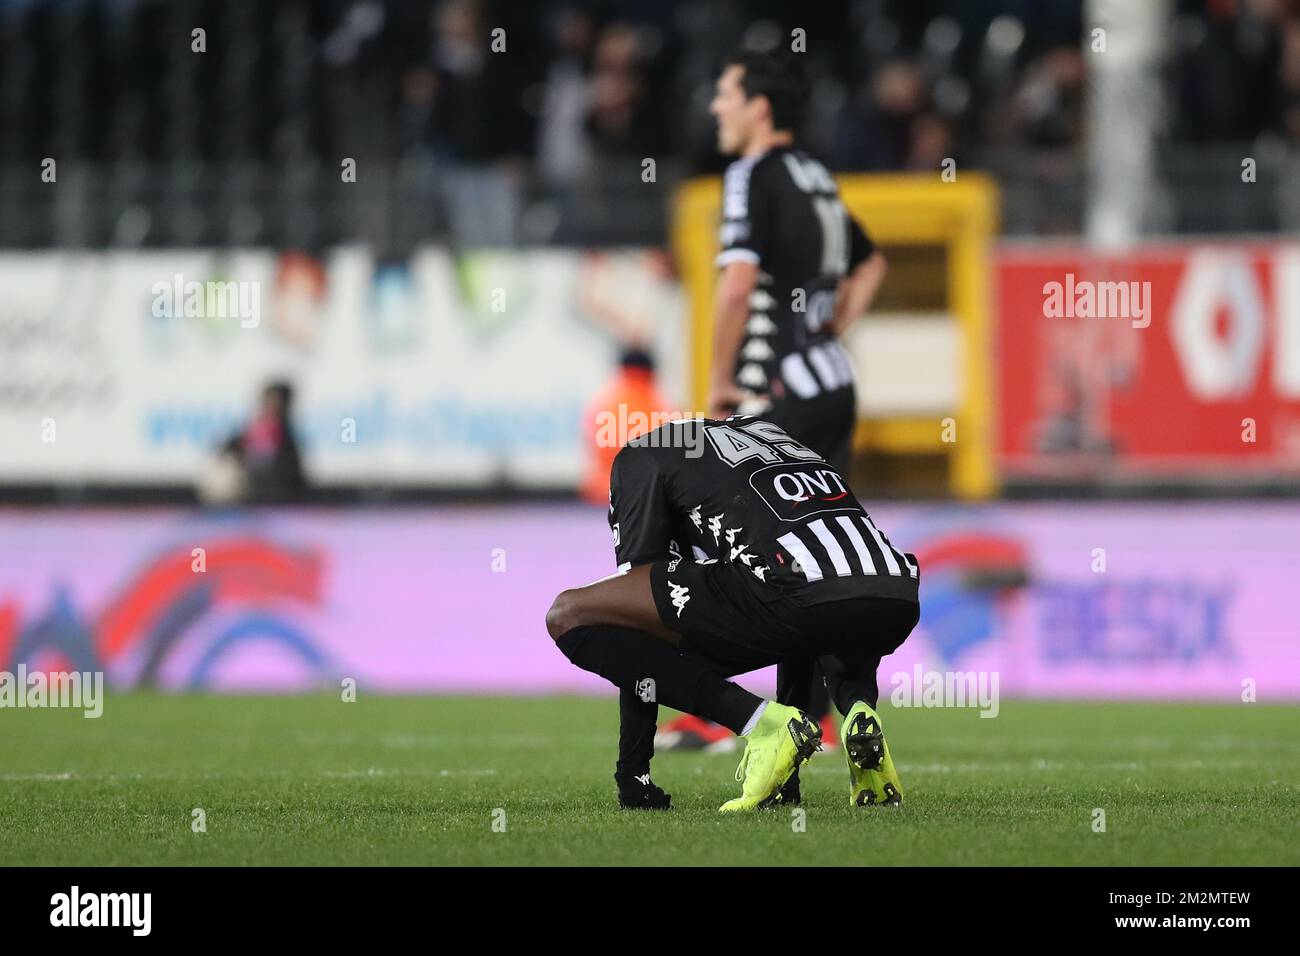 players look dejected after a soccer game between JPL clubs Sporting Charleroi and KRC Genk, Wednesday 05 December 2018 in Charleroi, in the 1/8th finals of the 'Croky Cup' Belgian cup.